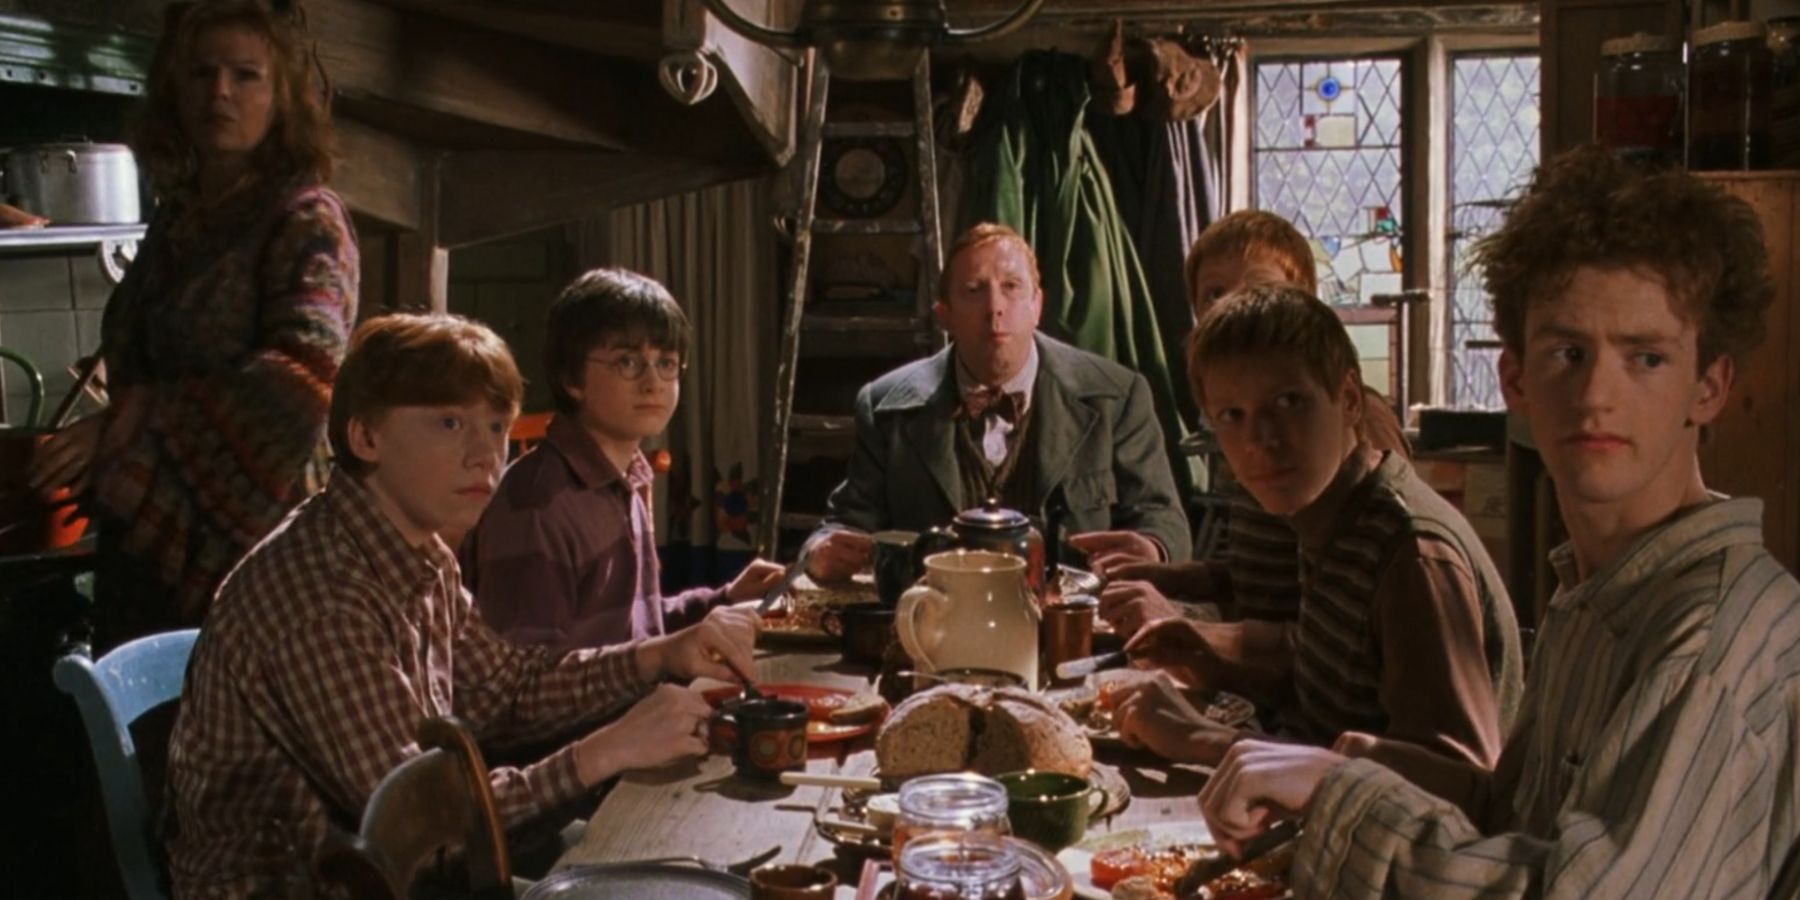 Harry Potter with the Weasley family in Harry Potter and the Chamber of Secrets.